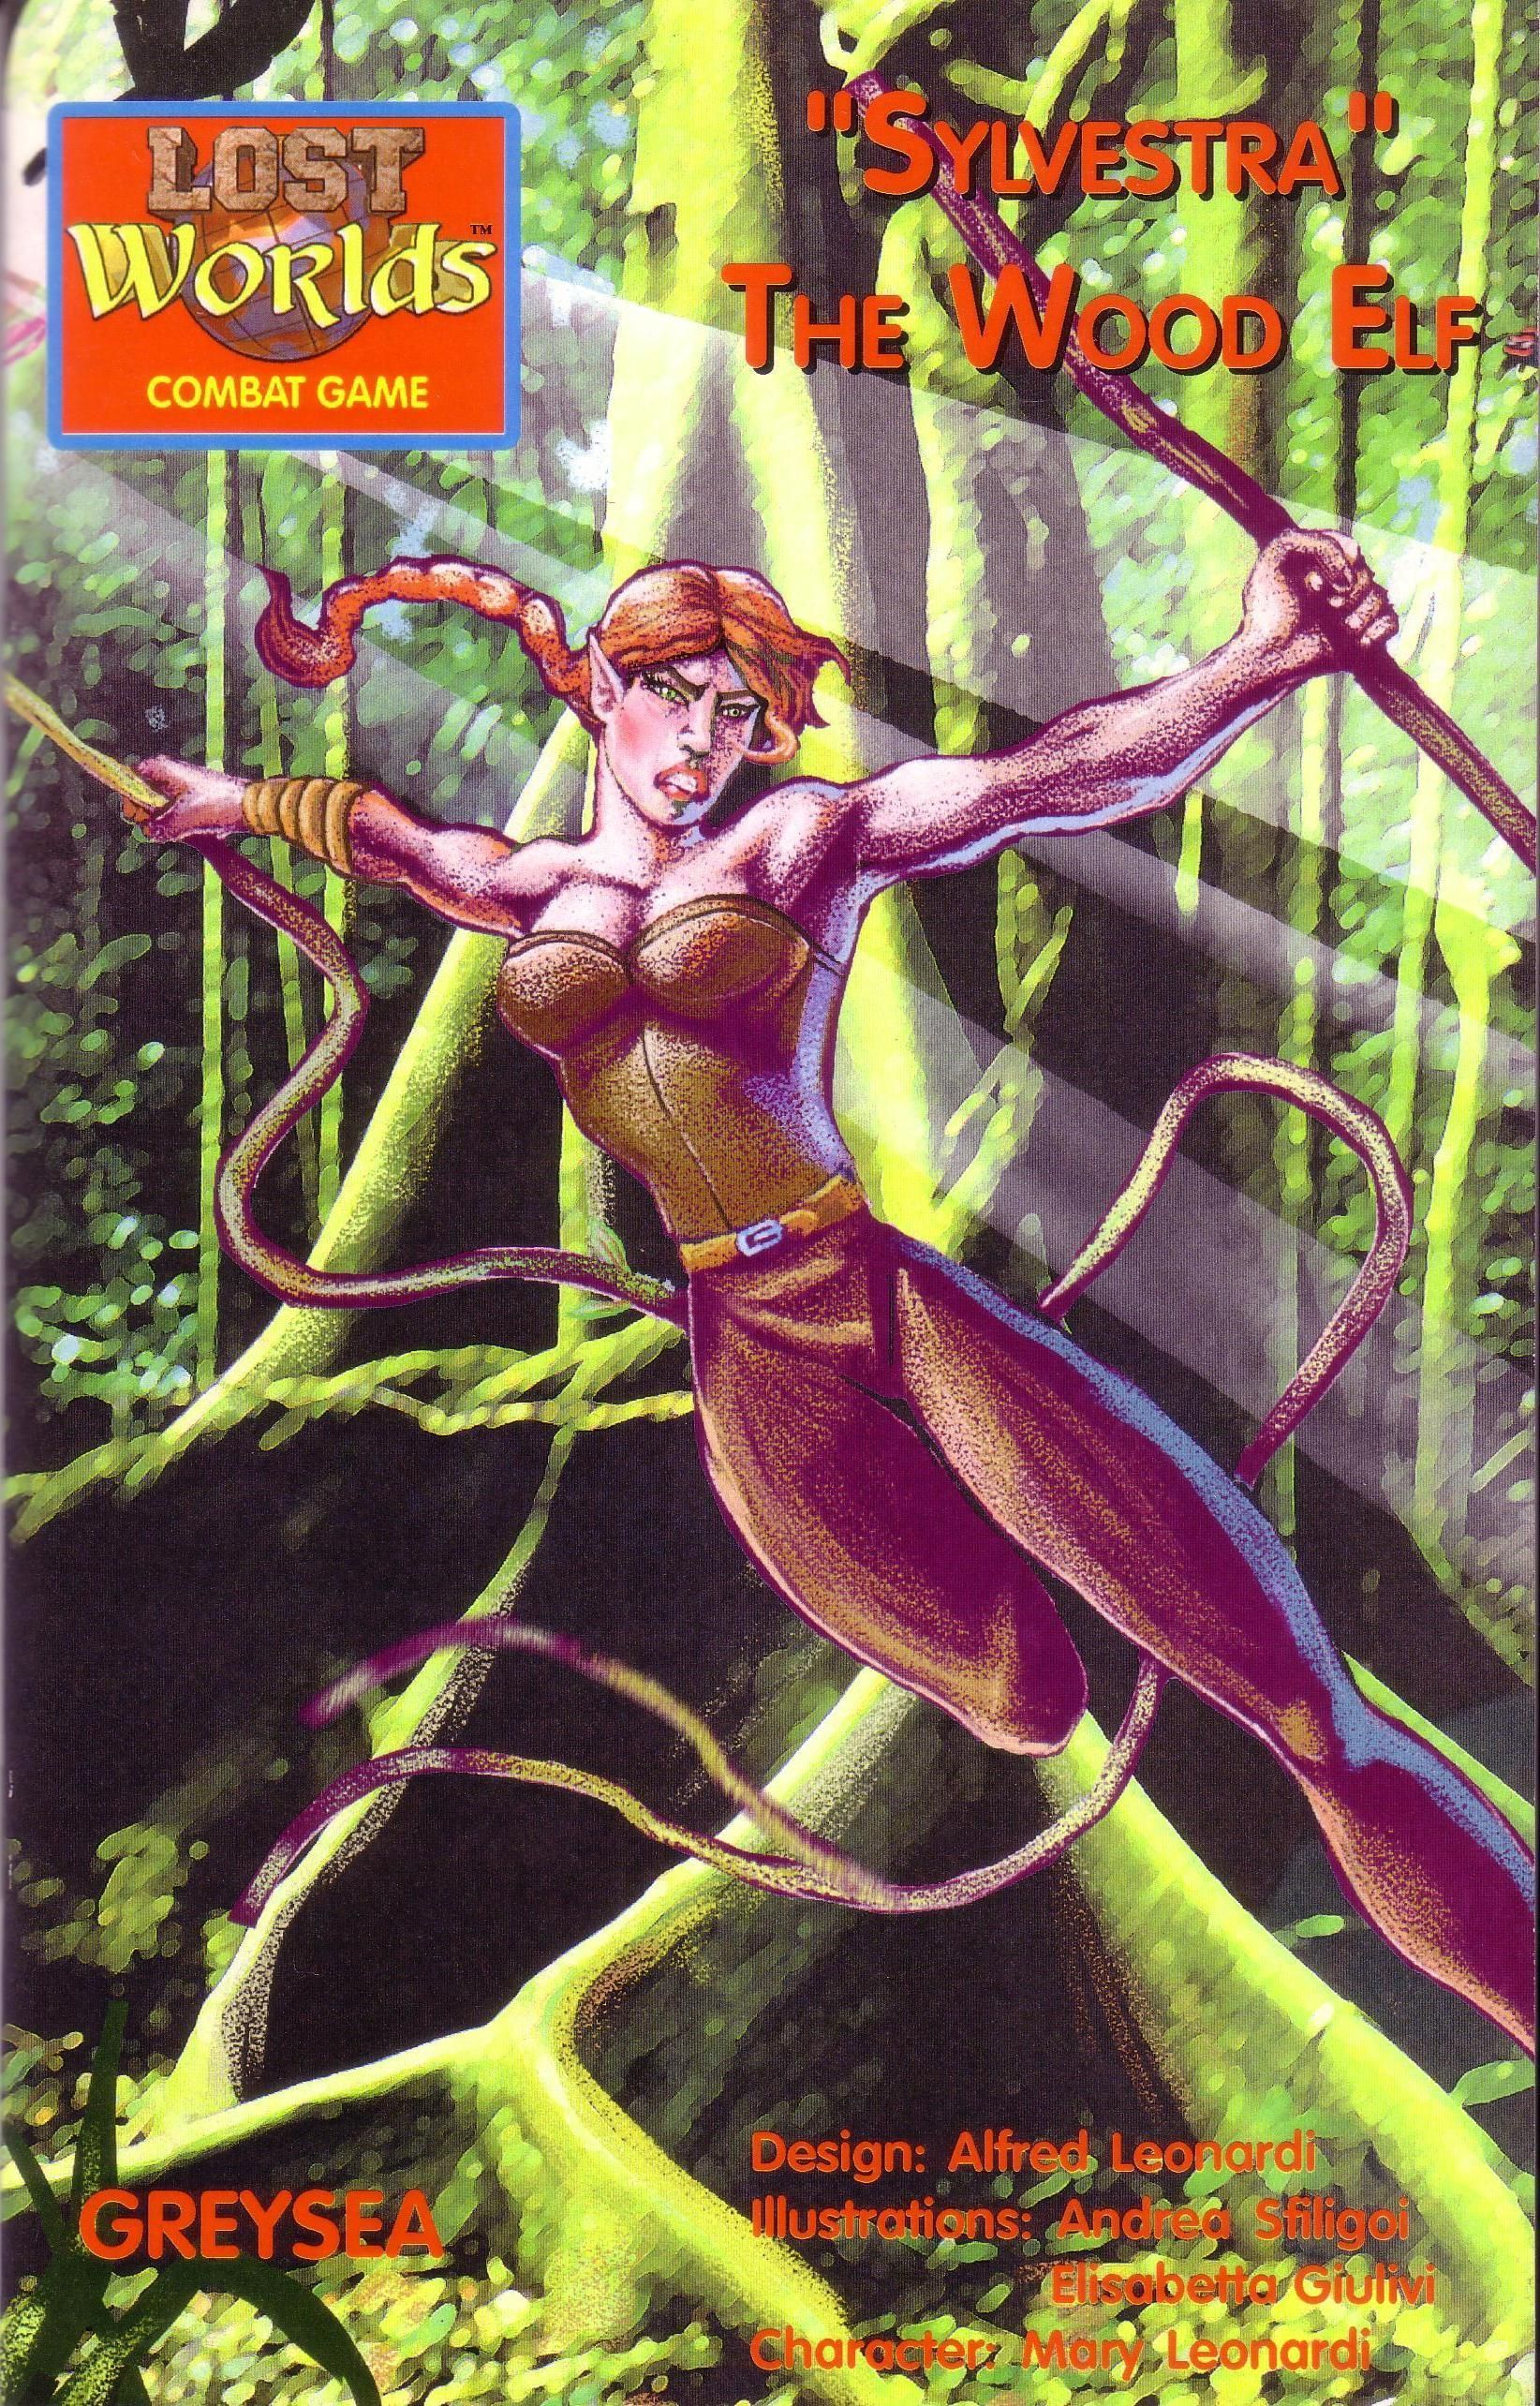 Lost Worlds: Sylvestra the Wood Elf